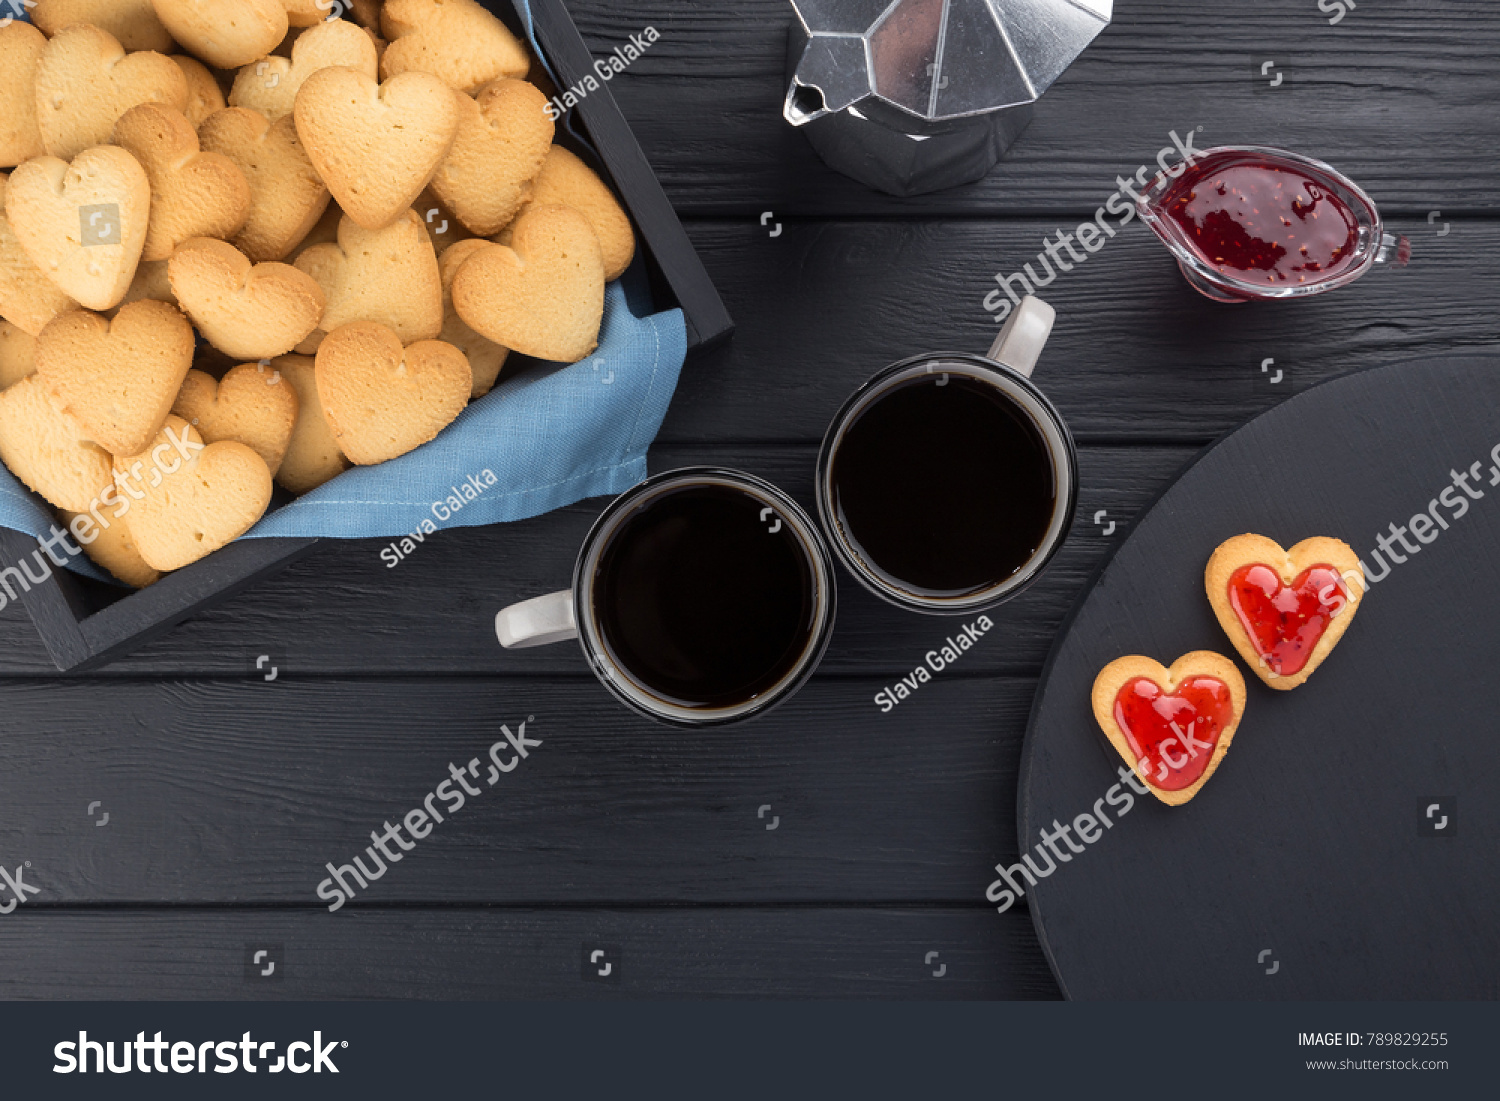 Heart shaped cookies decorated for Valentine's Day. Free space for text. Box with heart shaped cookies with coffee, coffee pot, jam on a black wooden table. Two heart shaped cookies with jam.  #789829255